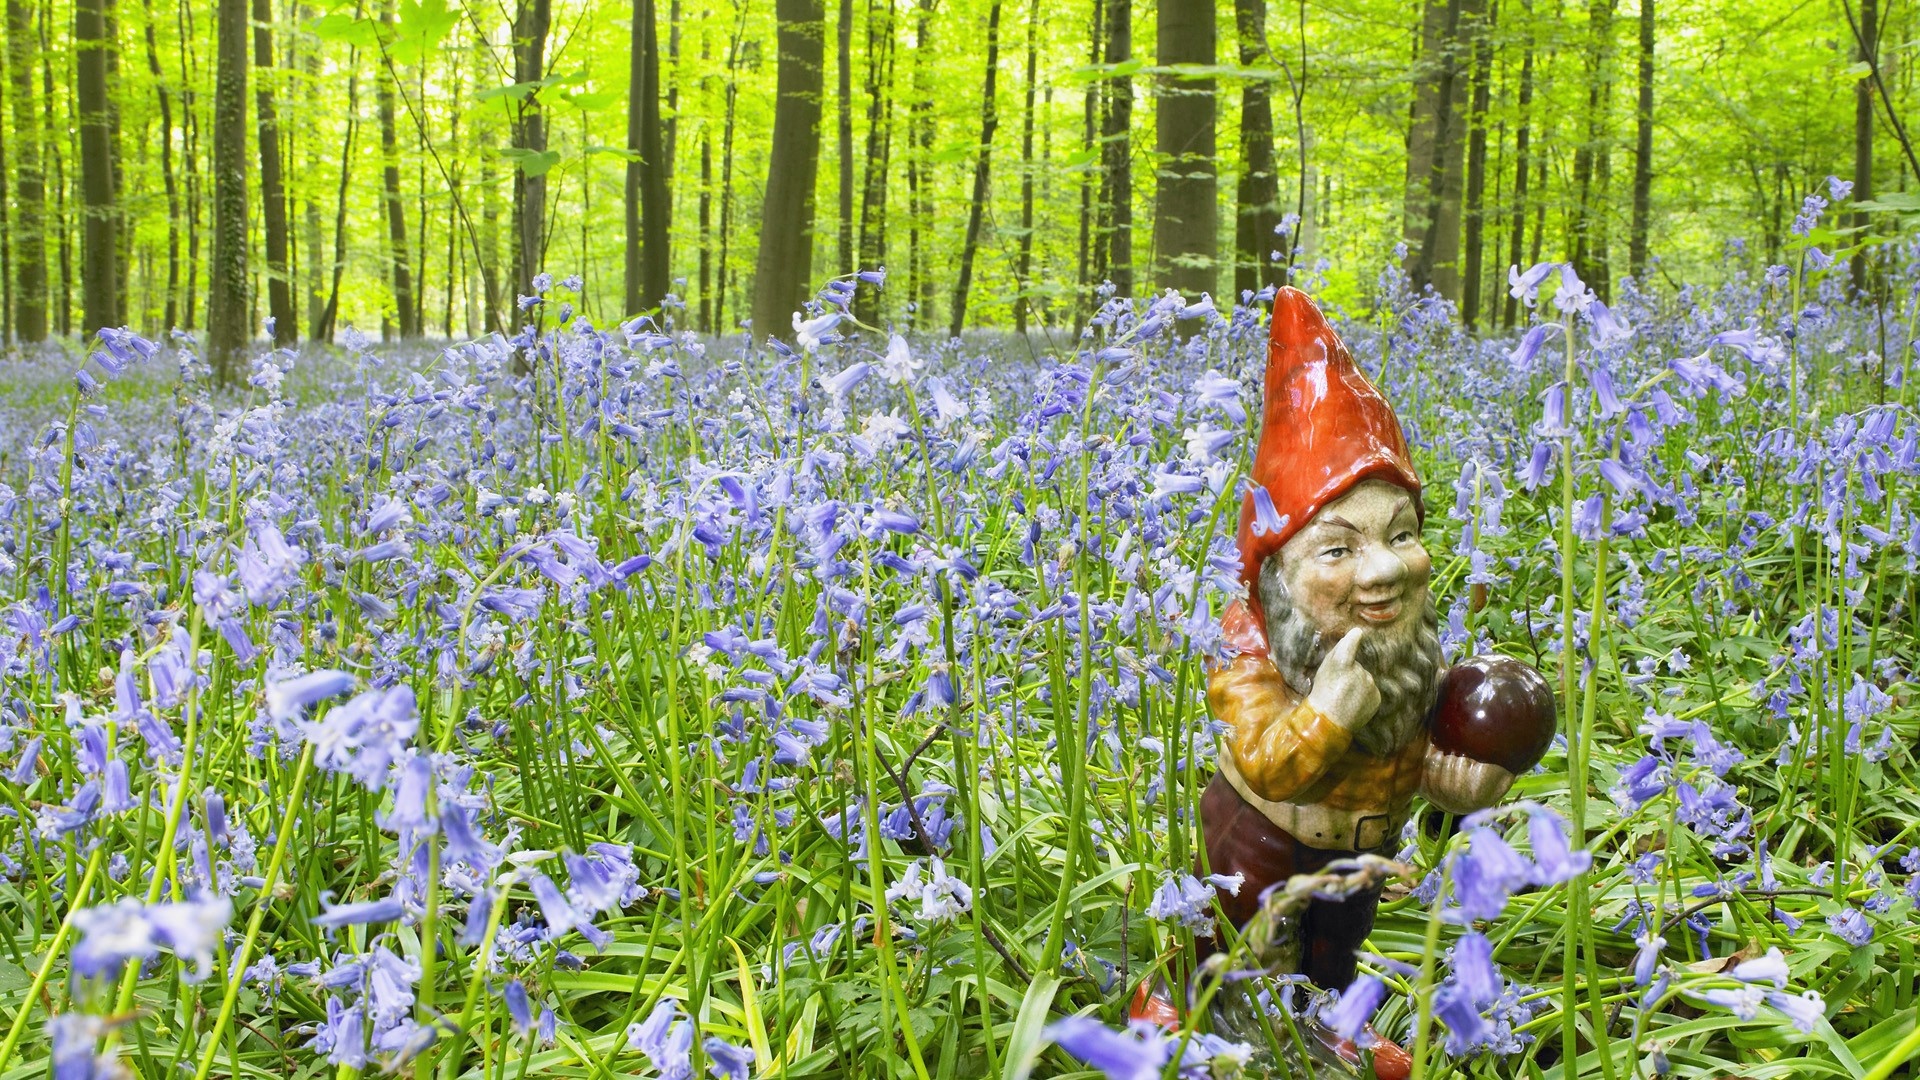 Gnome background wallpapers, Popular gnome backgrounds, Enchanting garden dcor, Magical creatures, 1920x1080 Full HD Desktop